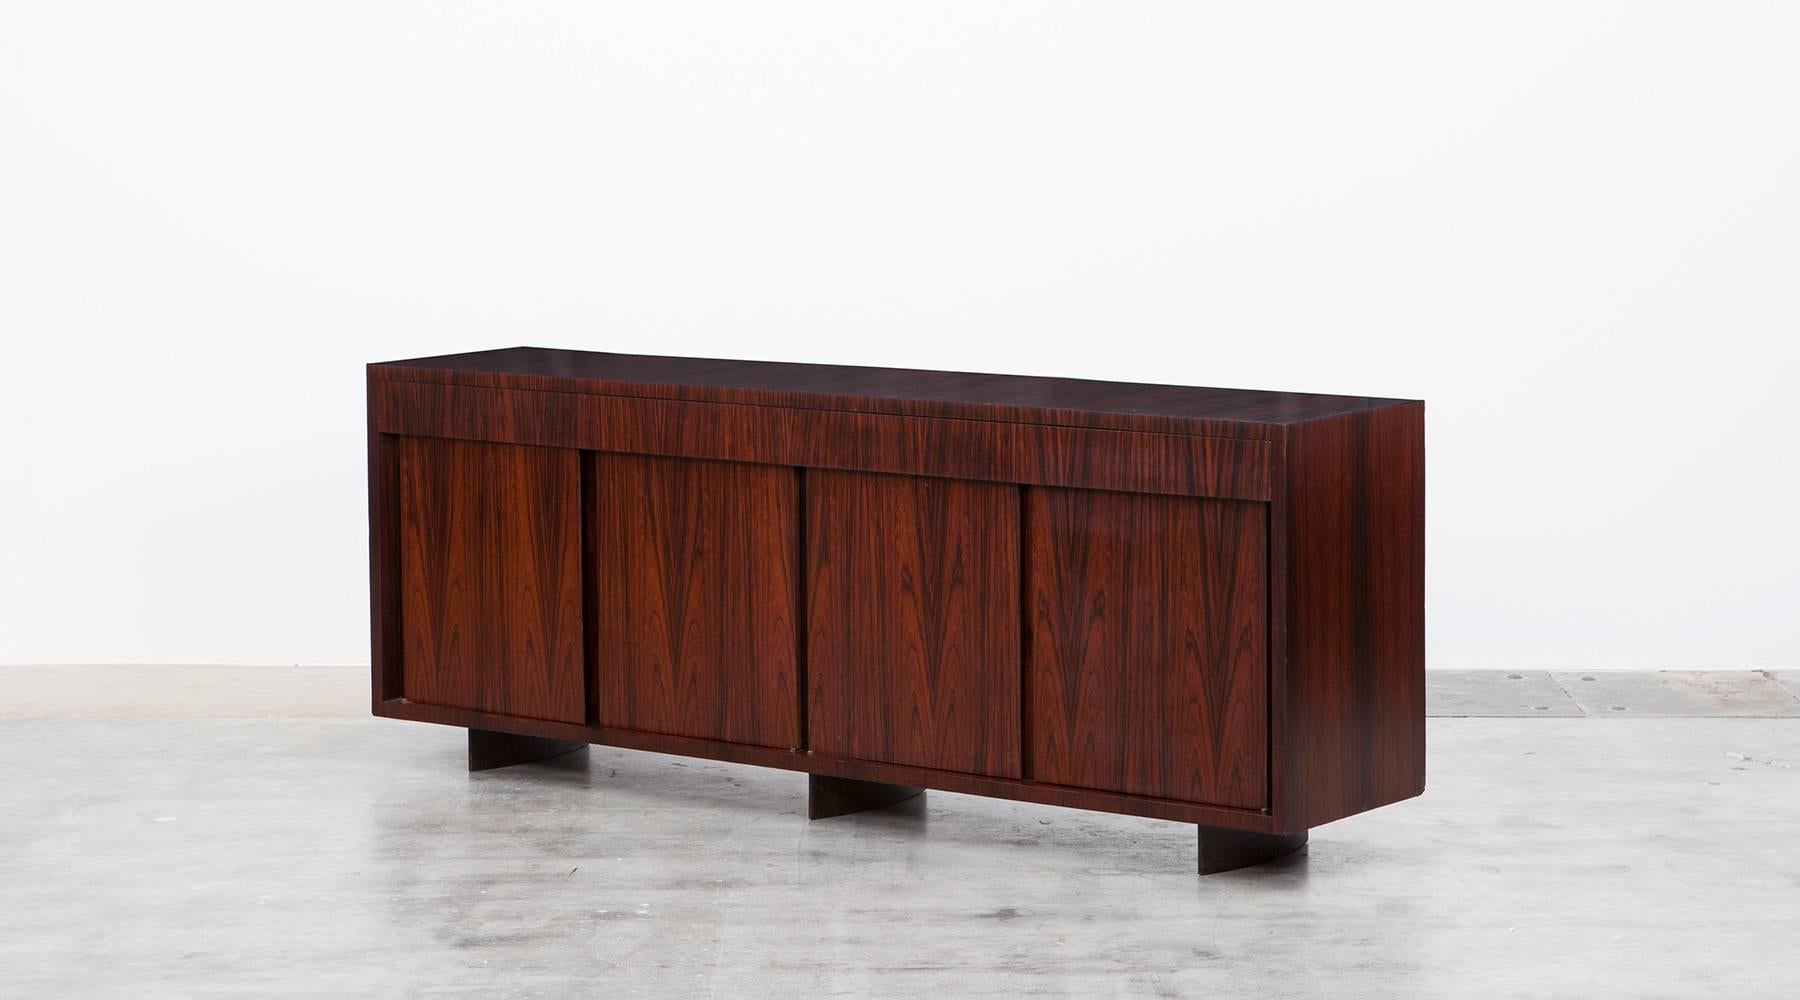 This four-door sideboard is very rare to find and designed by famous Brazilian Joaquim Tenreiro. The Sideboard comes in wood and contains underneath the top four drawers which externally on the first view are not visible. Manufactured by Tenreiro